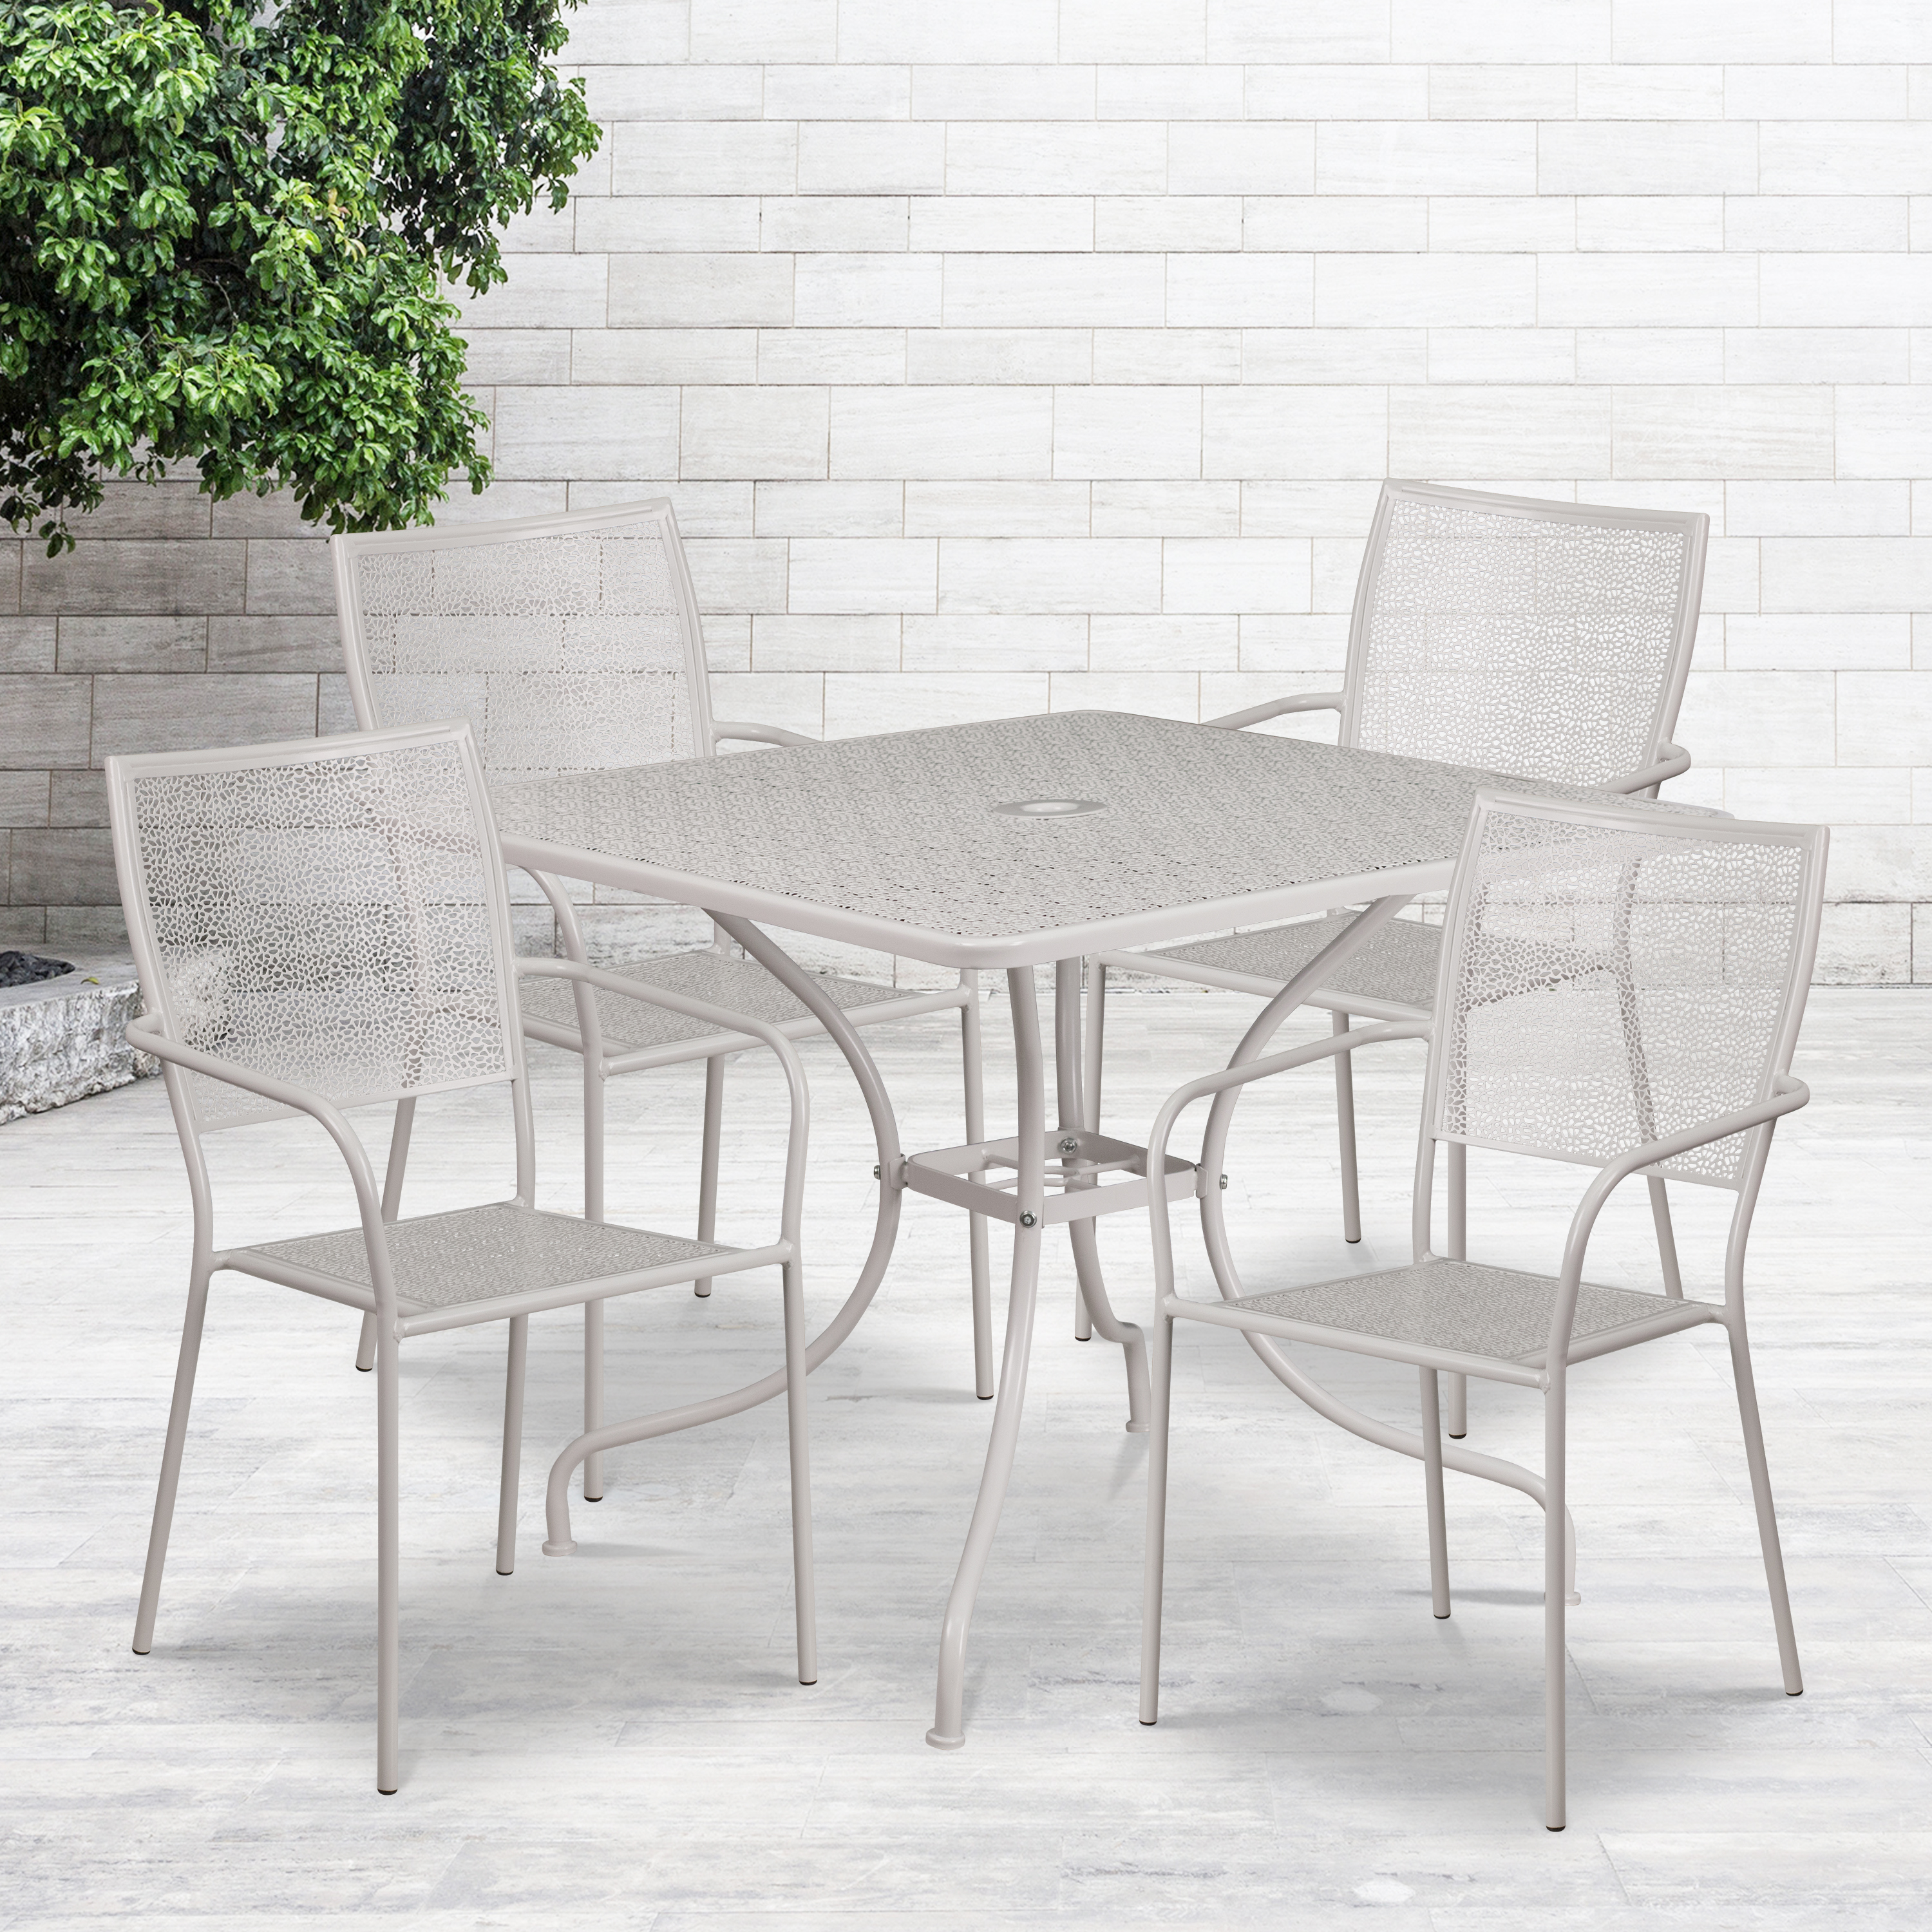 Flash Furniture Oia Commercial Grade 35.5" Square Light Gray Indoor-Outdoor Steel Patio Table Set with 4 Square Back Chairs - image 2 of 5